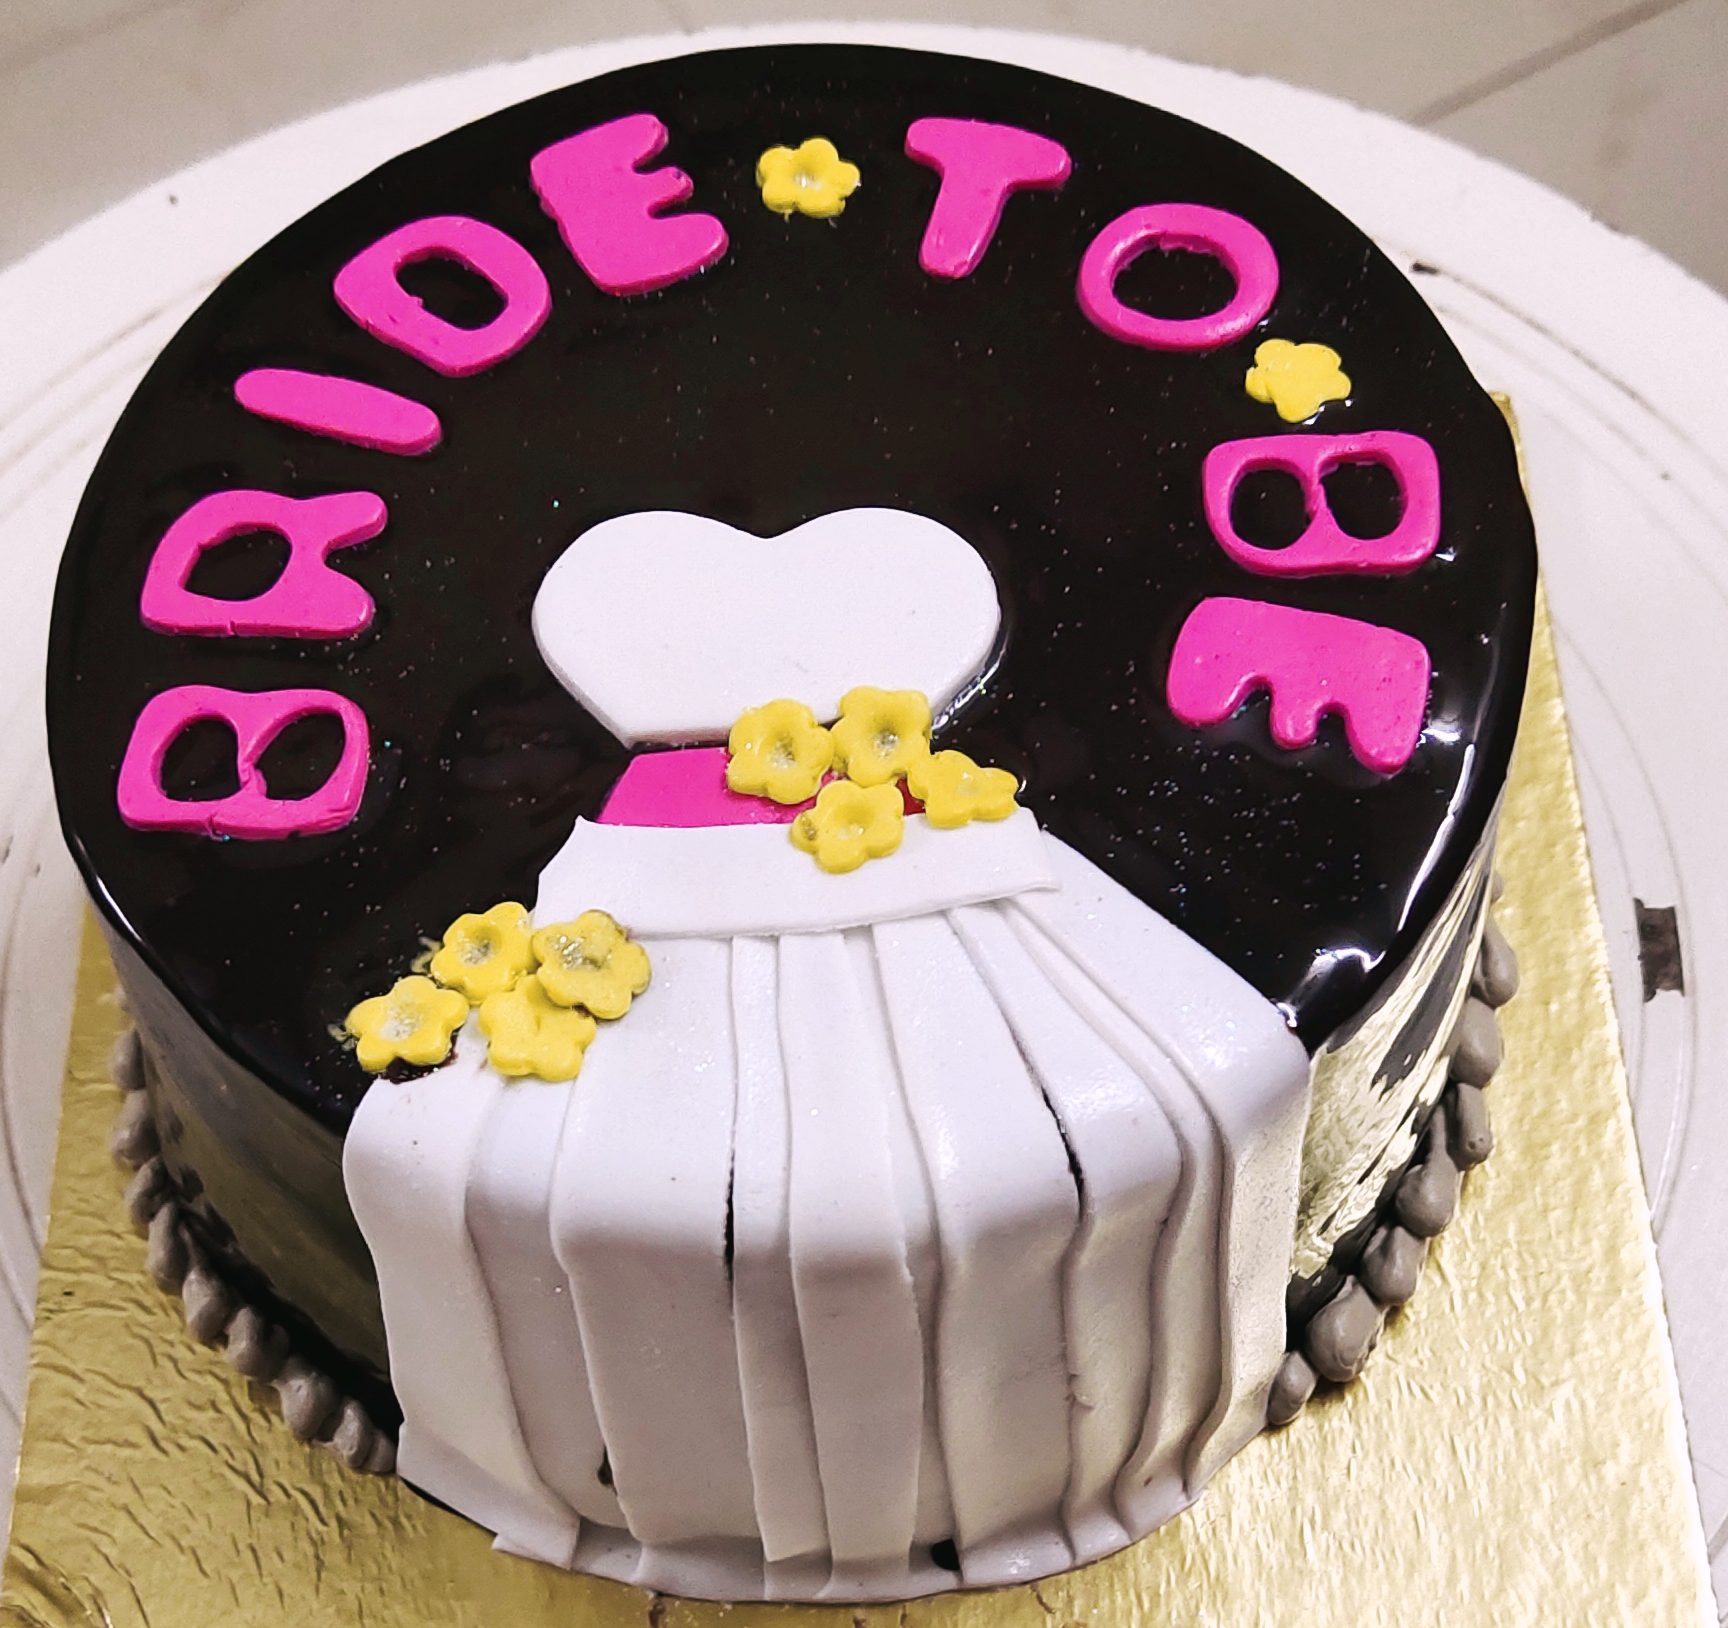 Bride To Be Cake in Electronic City, Bangalore | Delivery Date: 23 June 2022 Designs, Images, Price Near Me